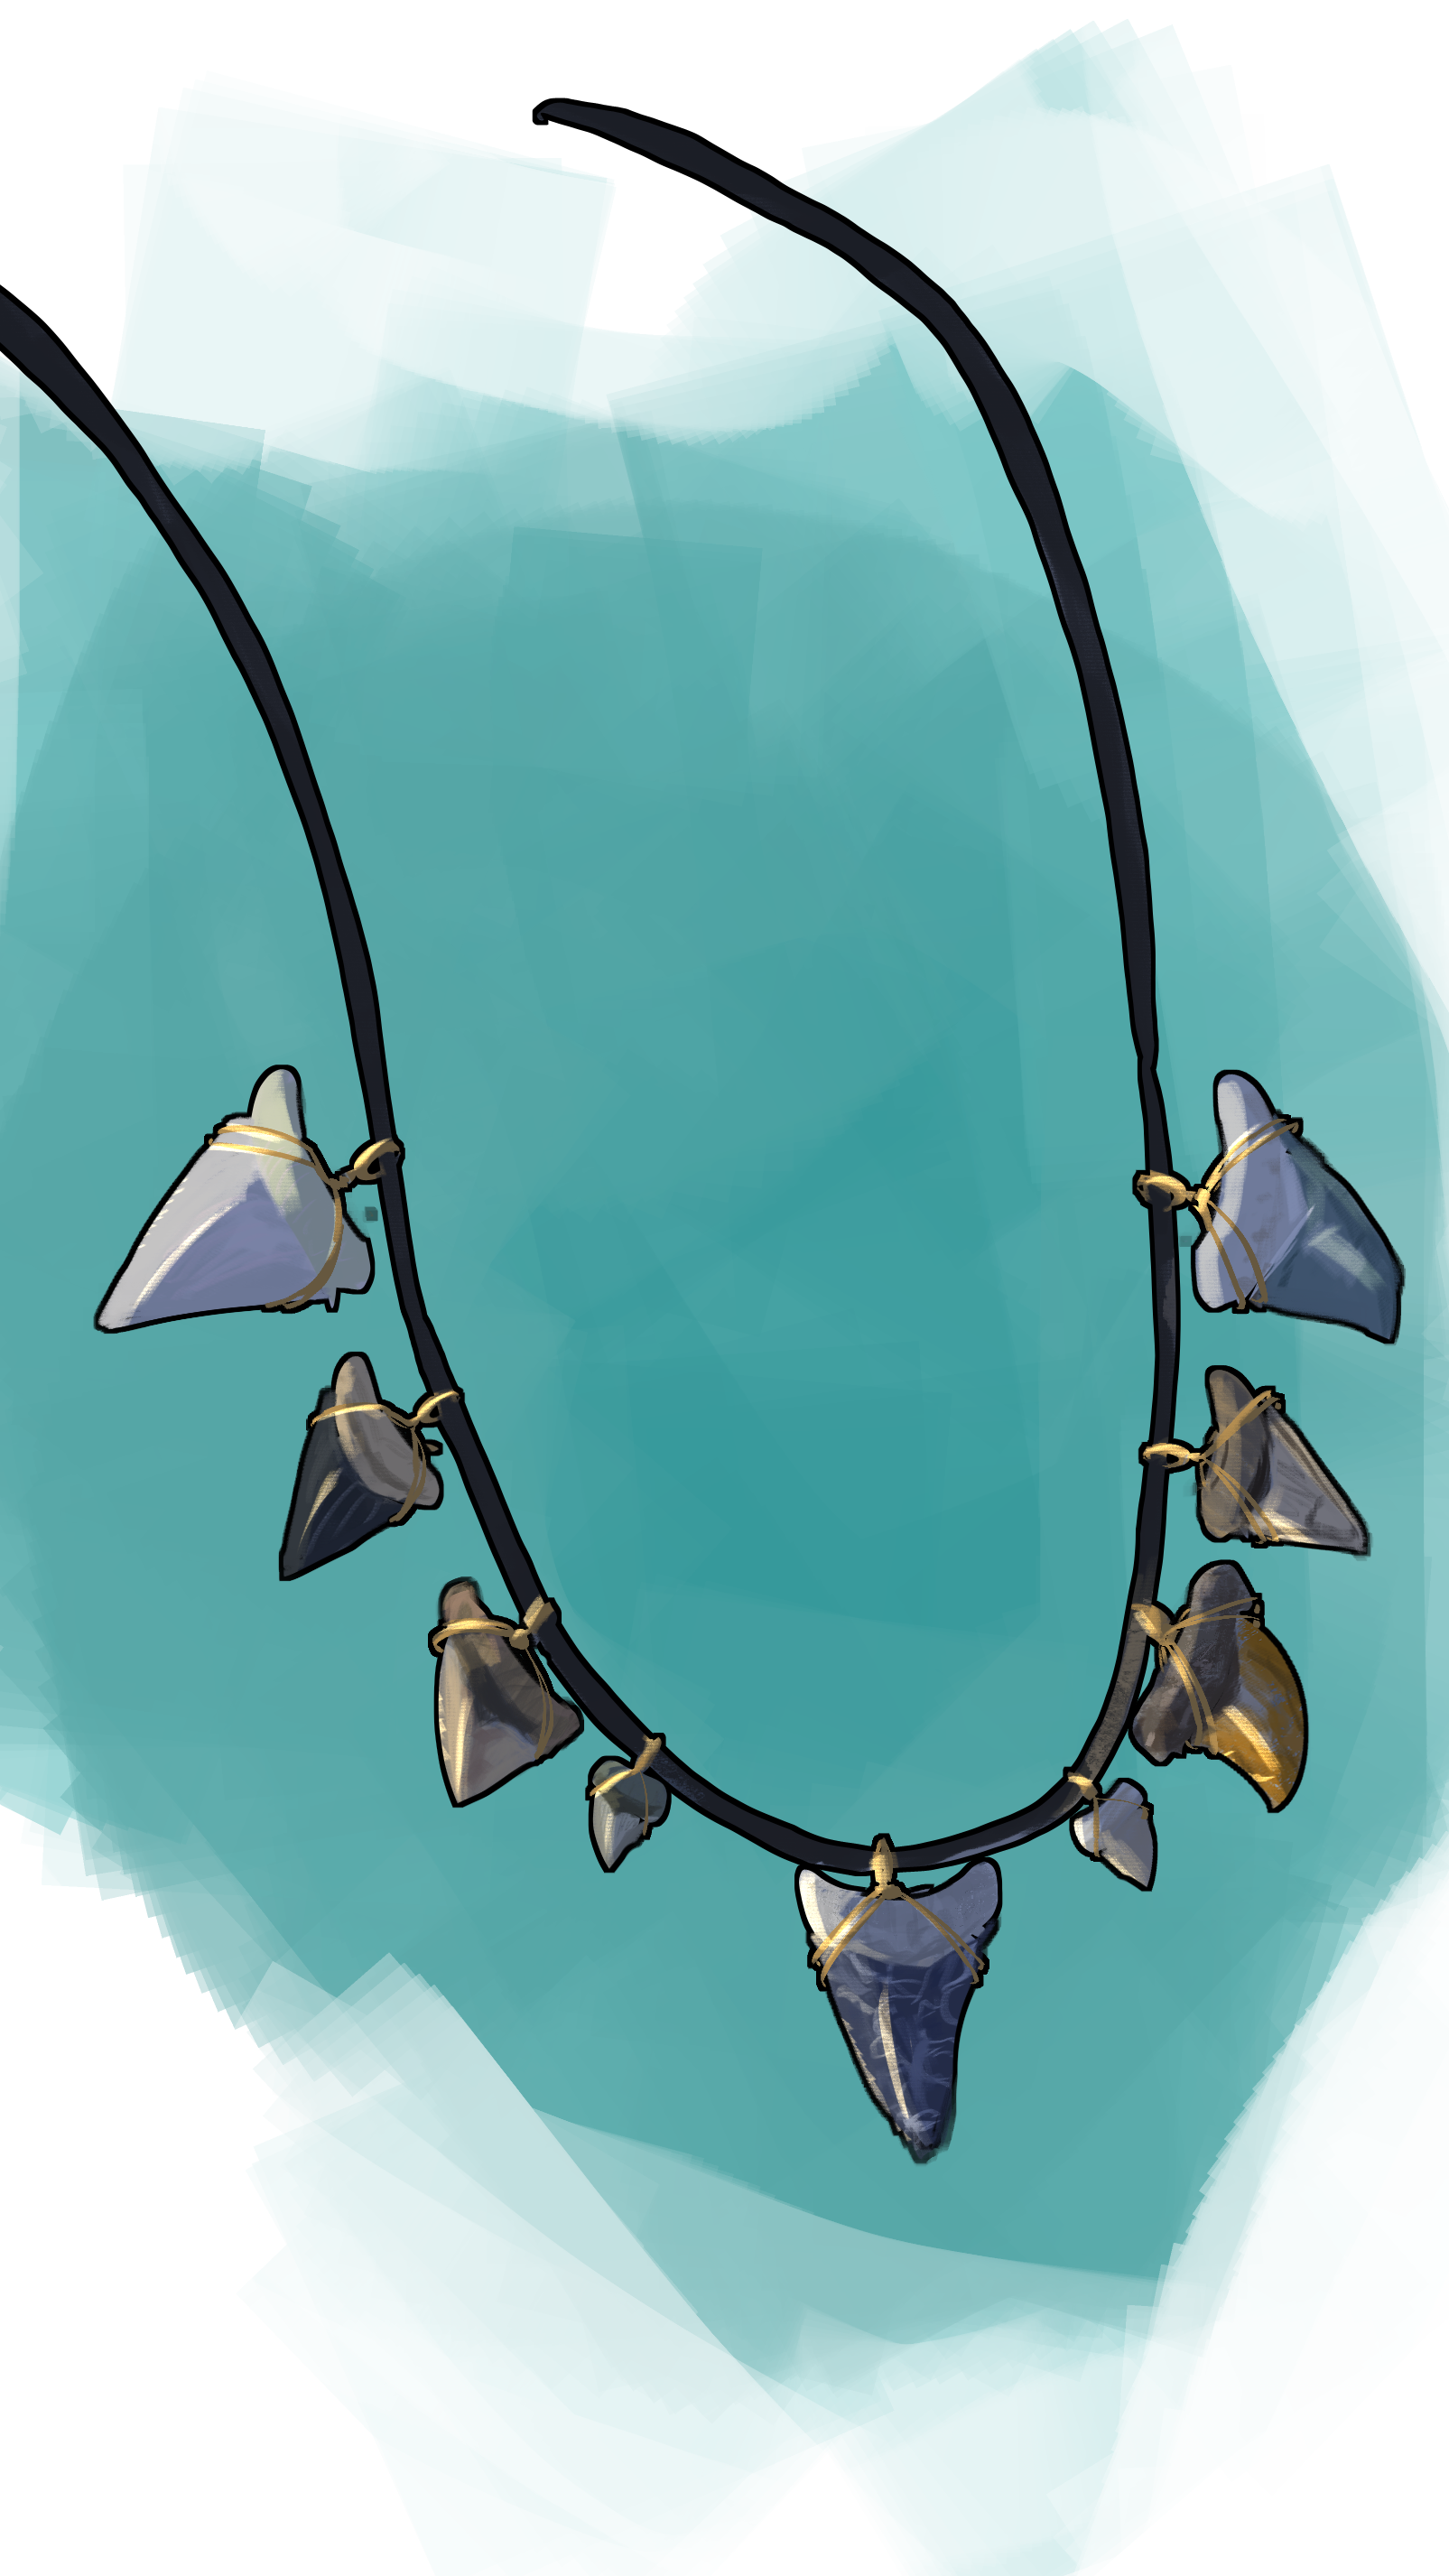 Shark tooth Necklace. Made for Cave Gaming

Digital